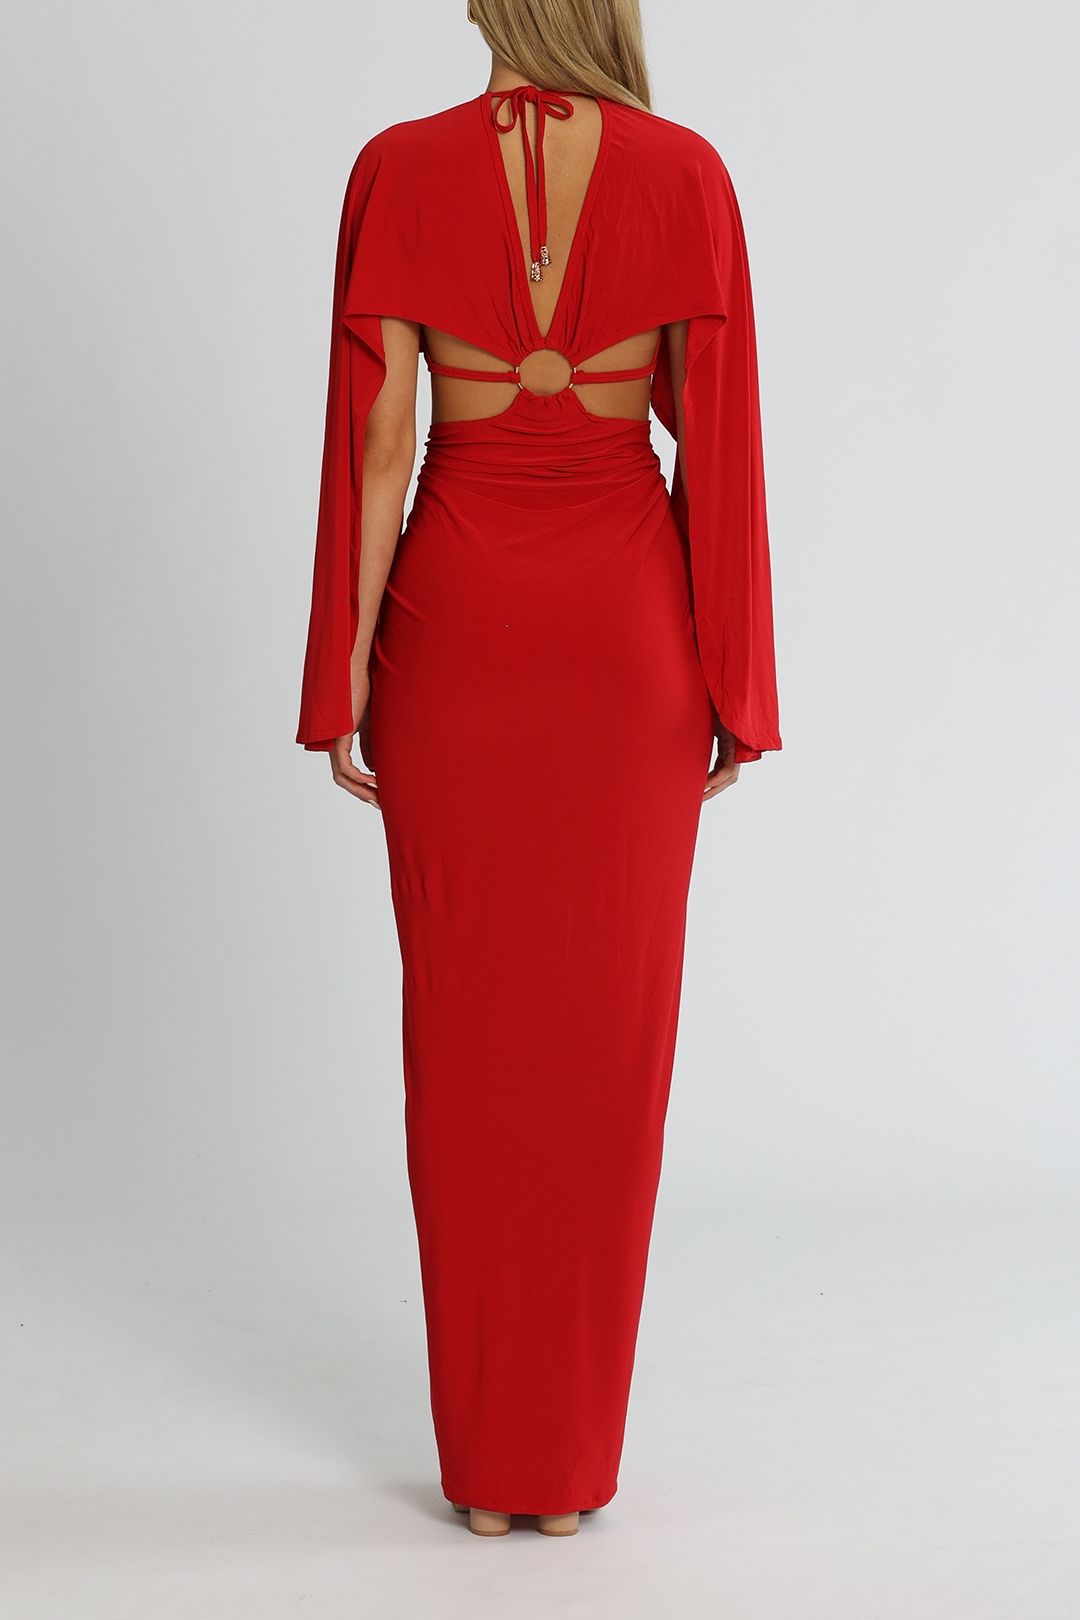 J. Angelique Selena Gown Red Sleeved